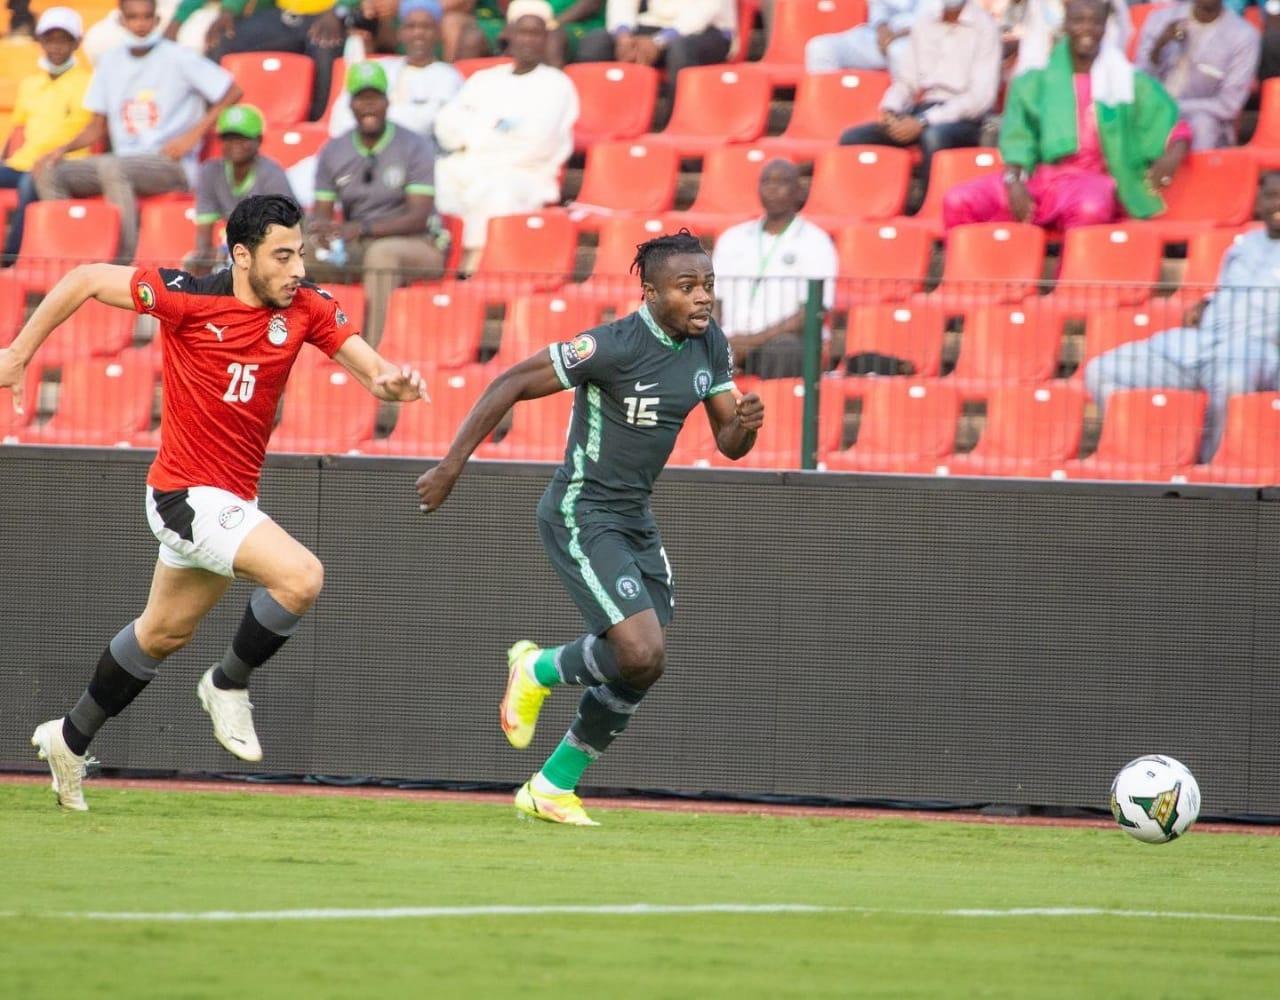 AFCON 2021: Simon Wishes Injured Egypt’s Tawfik Quick Recovery